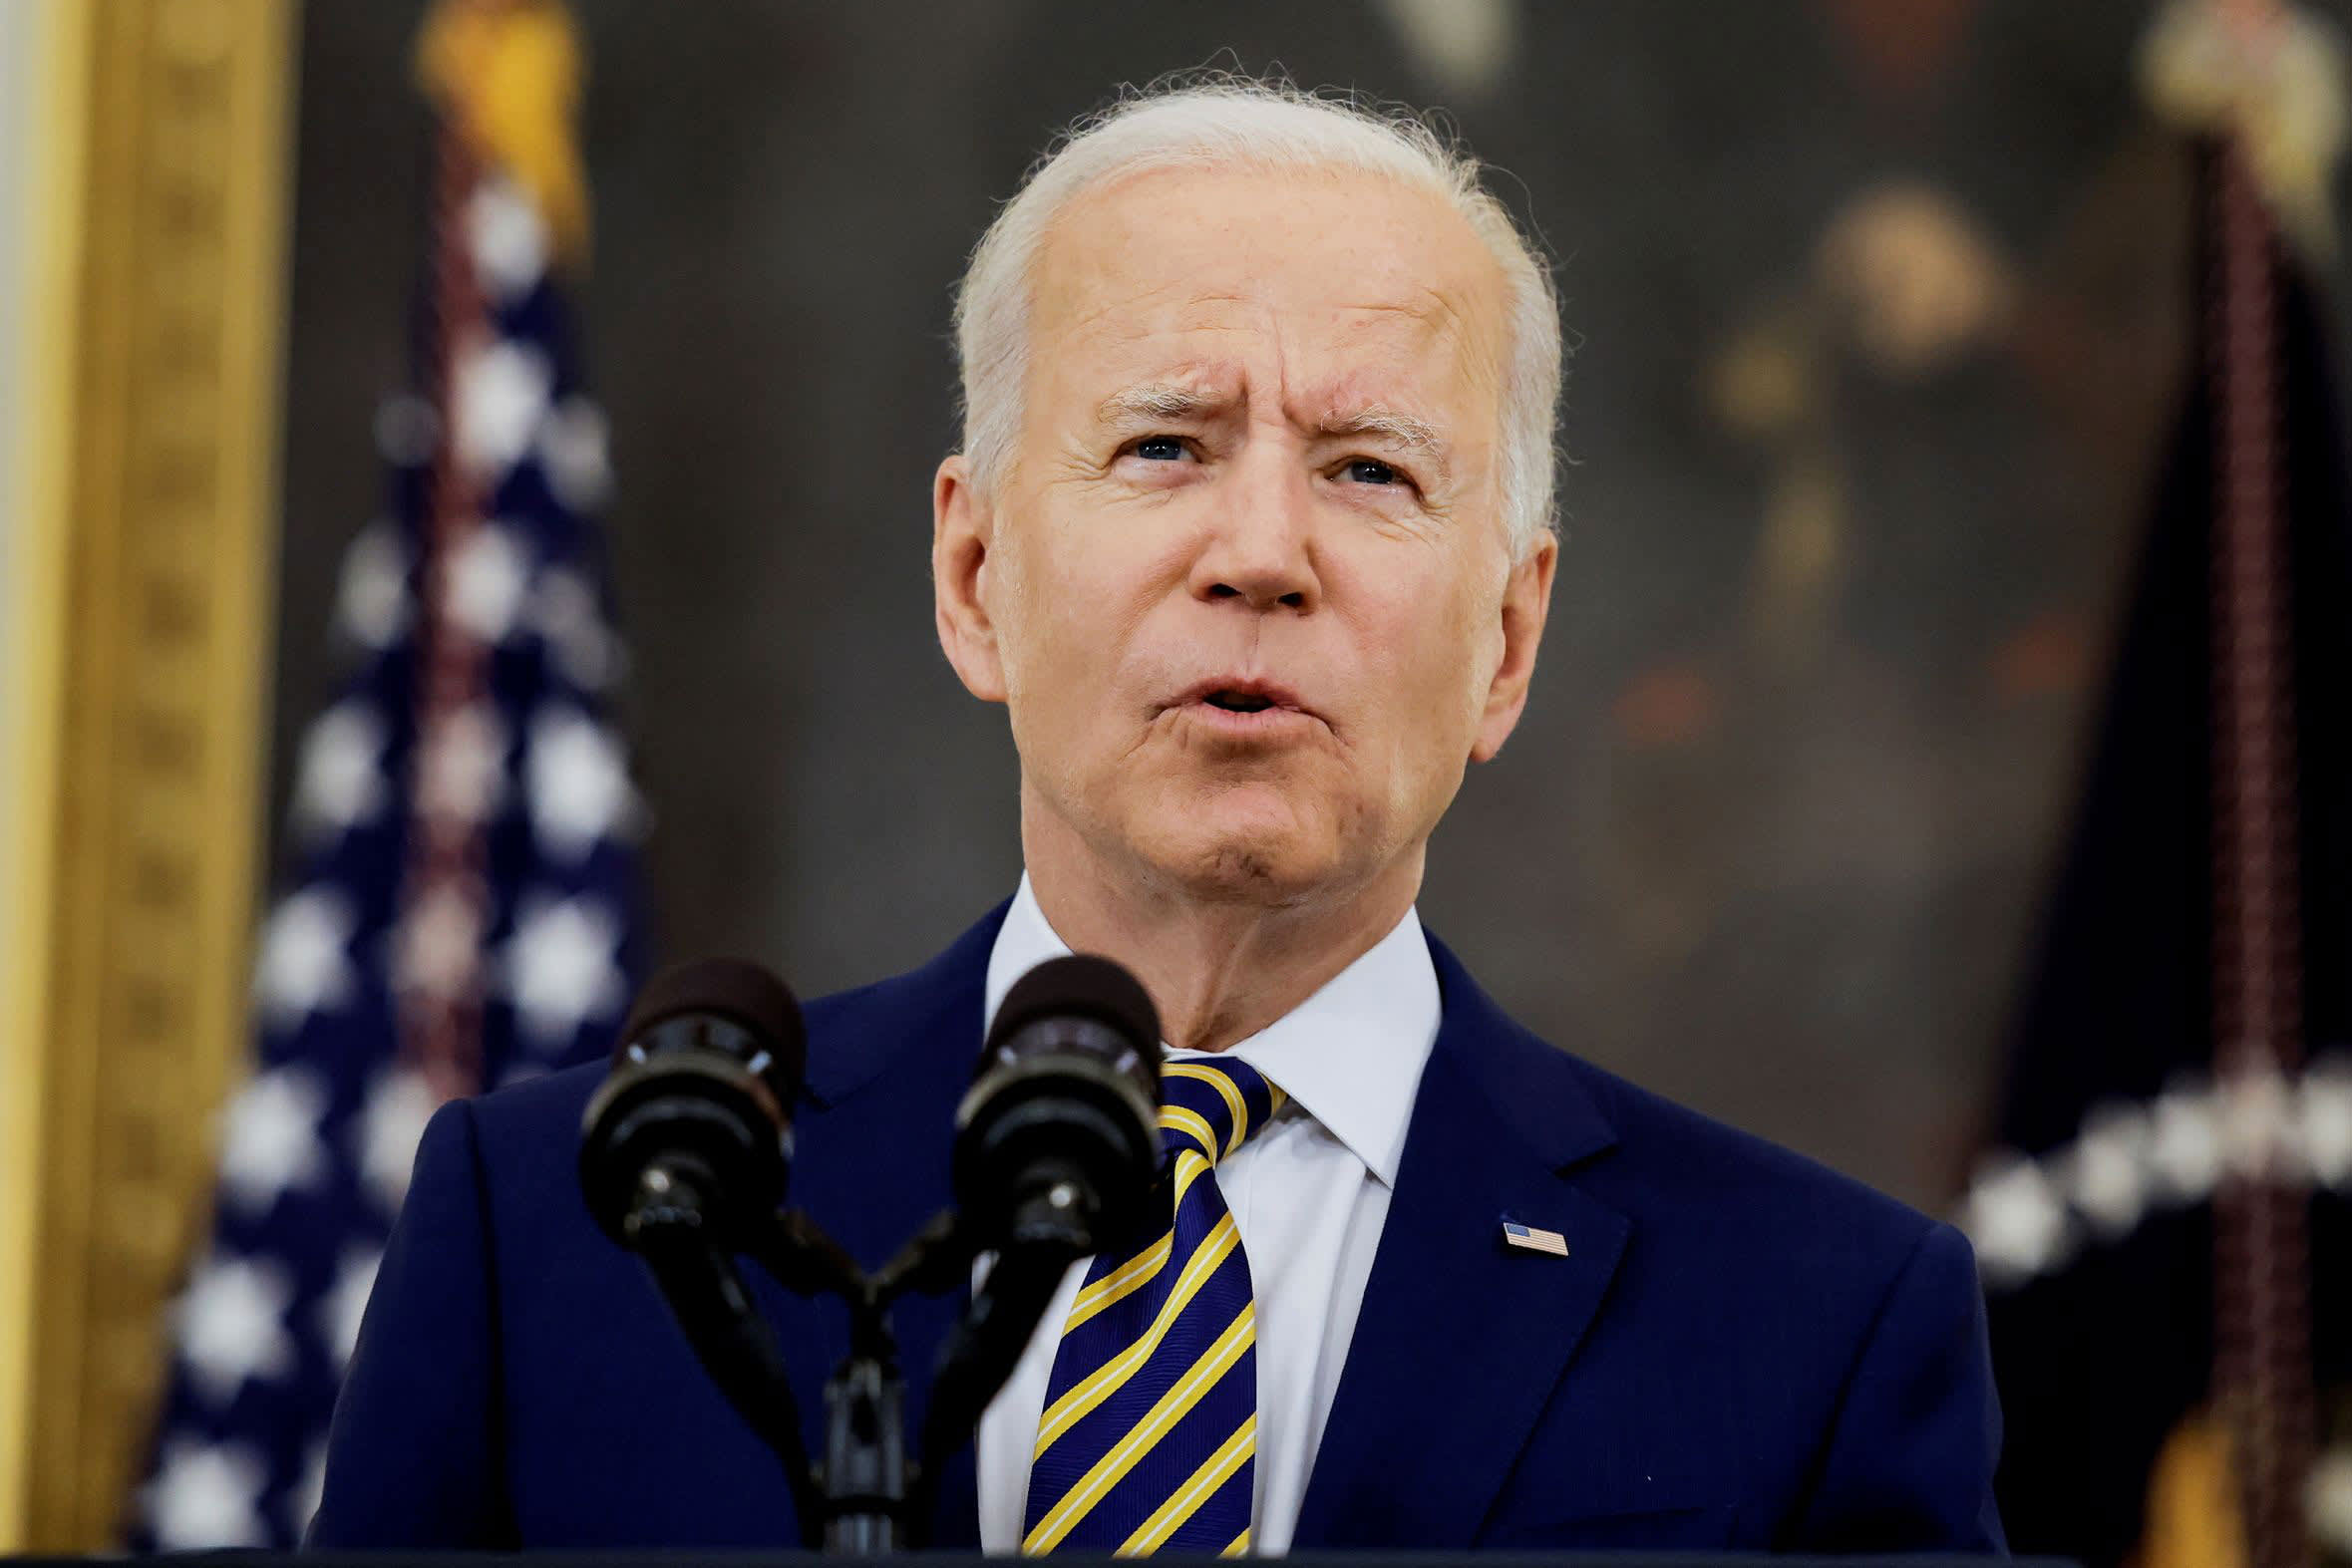 Biden's new Covid vaccine push will focus on workers, students, doctor's offices..